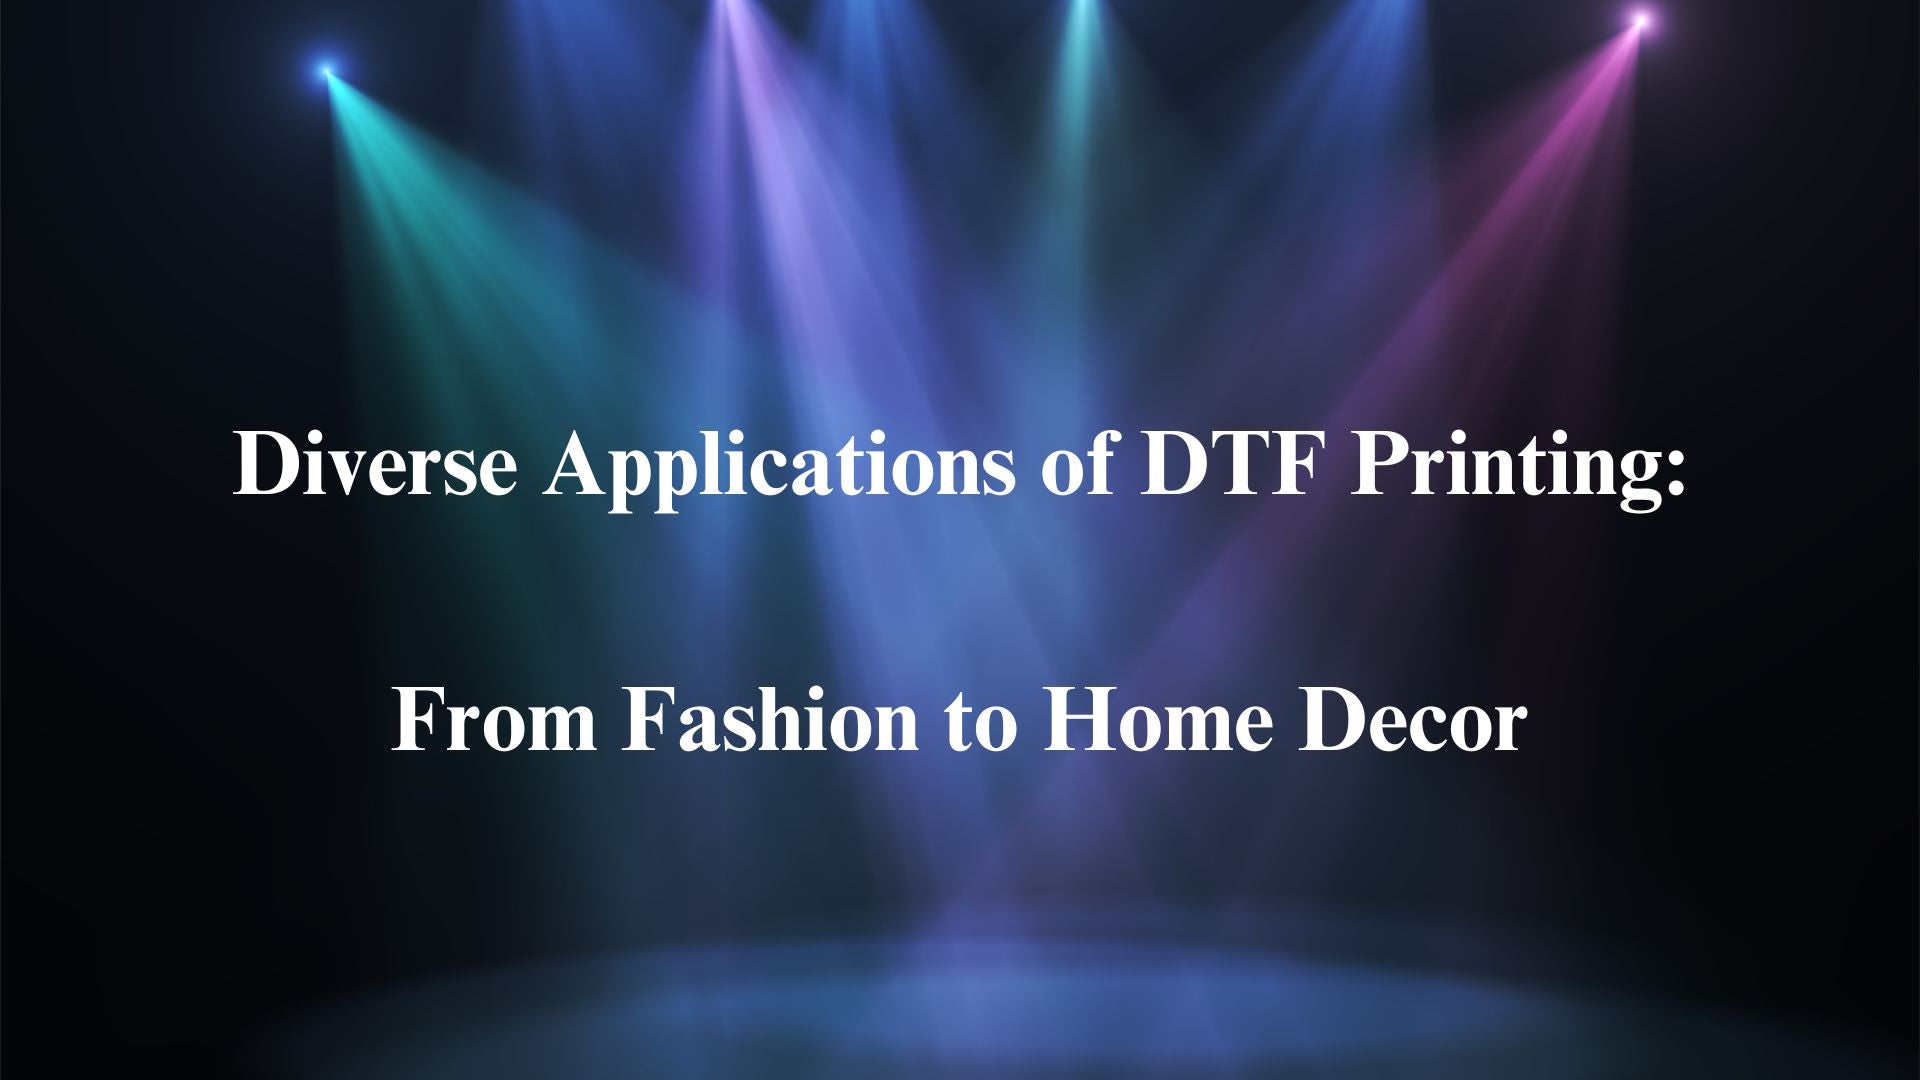 Diverse Applications of DTF Printing: From Fashion to Home Decor